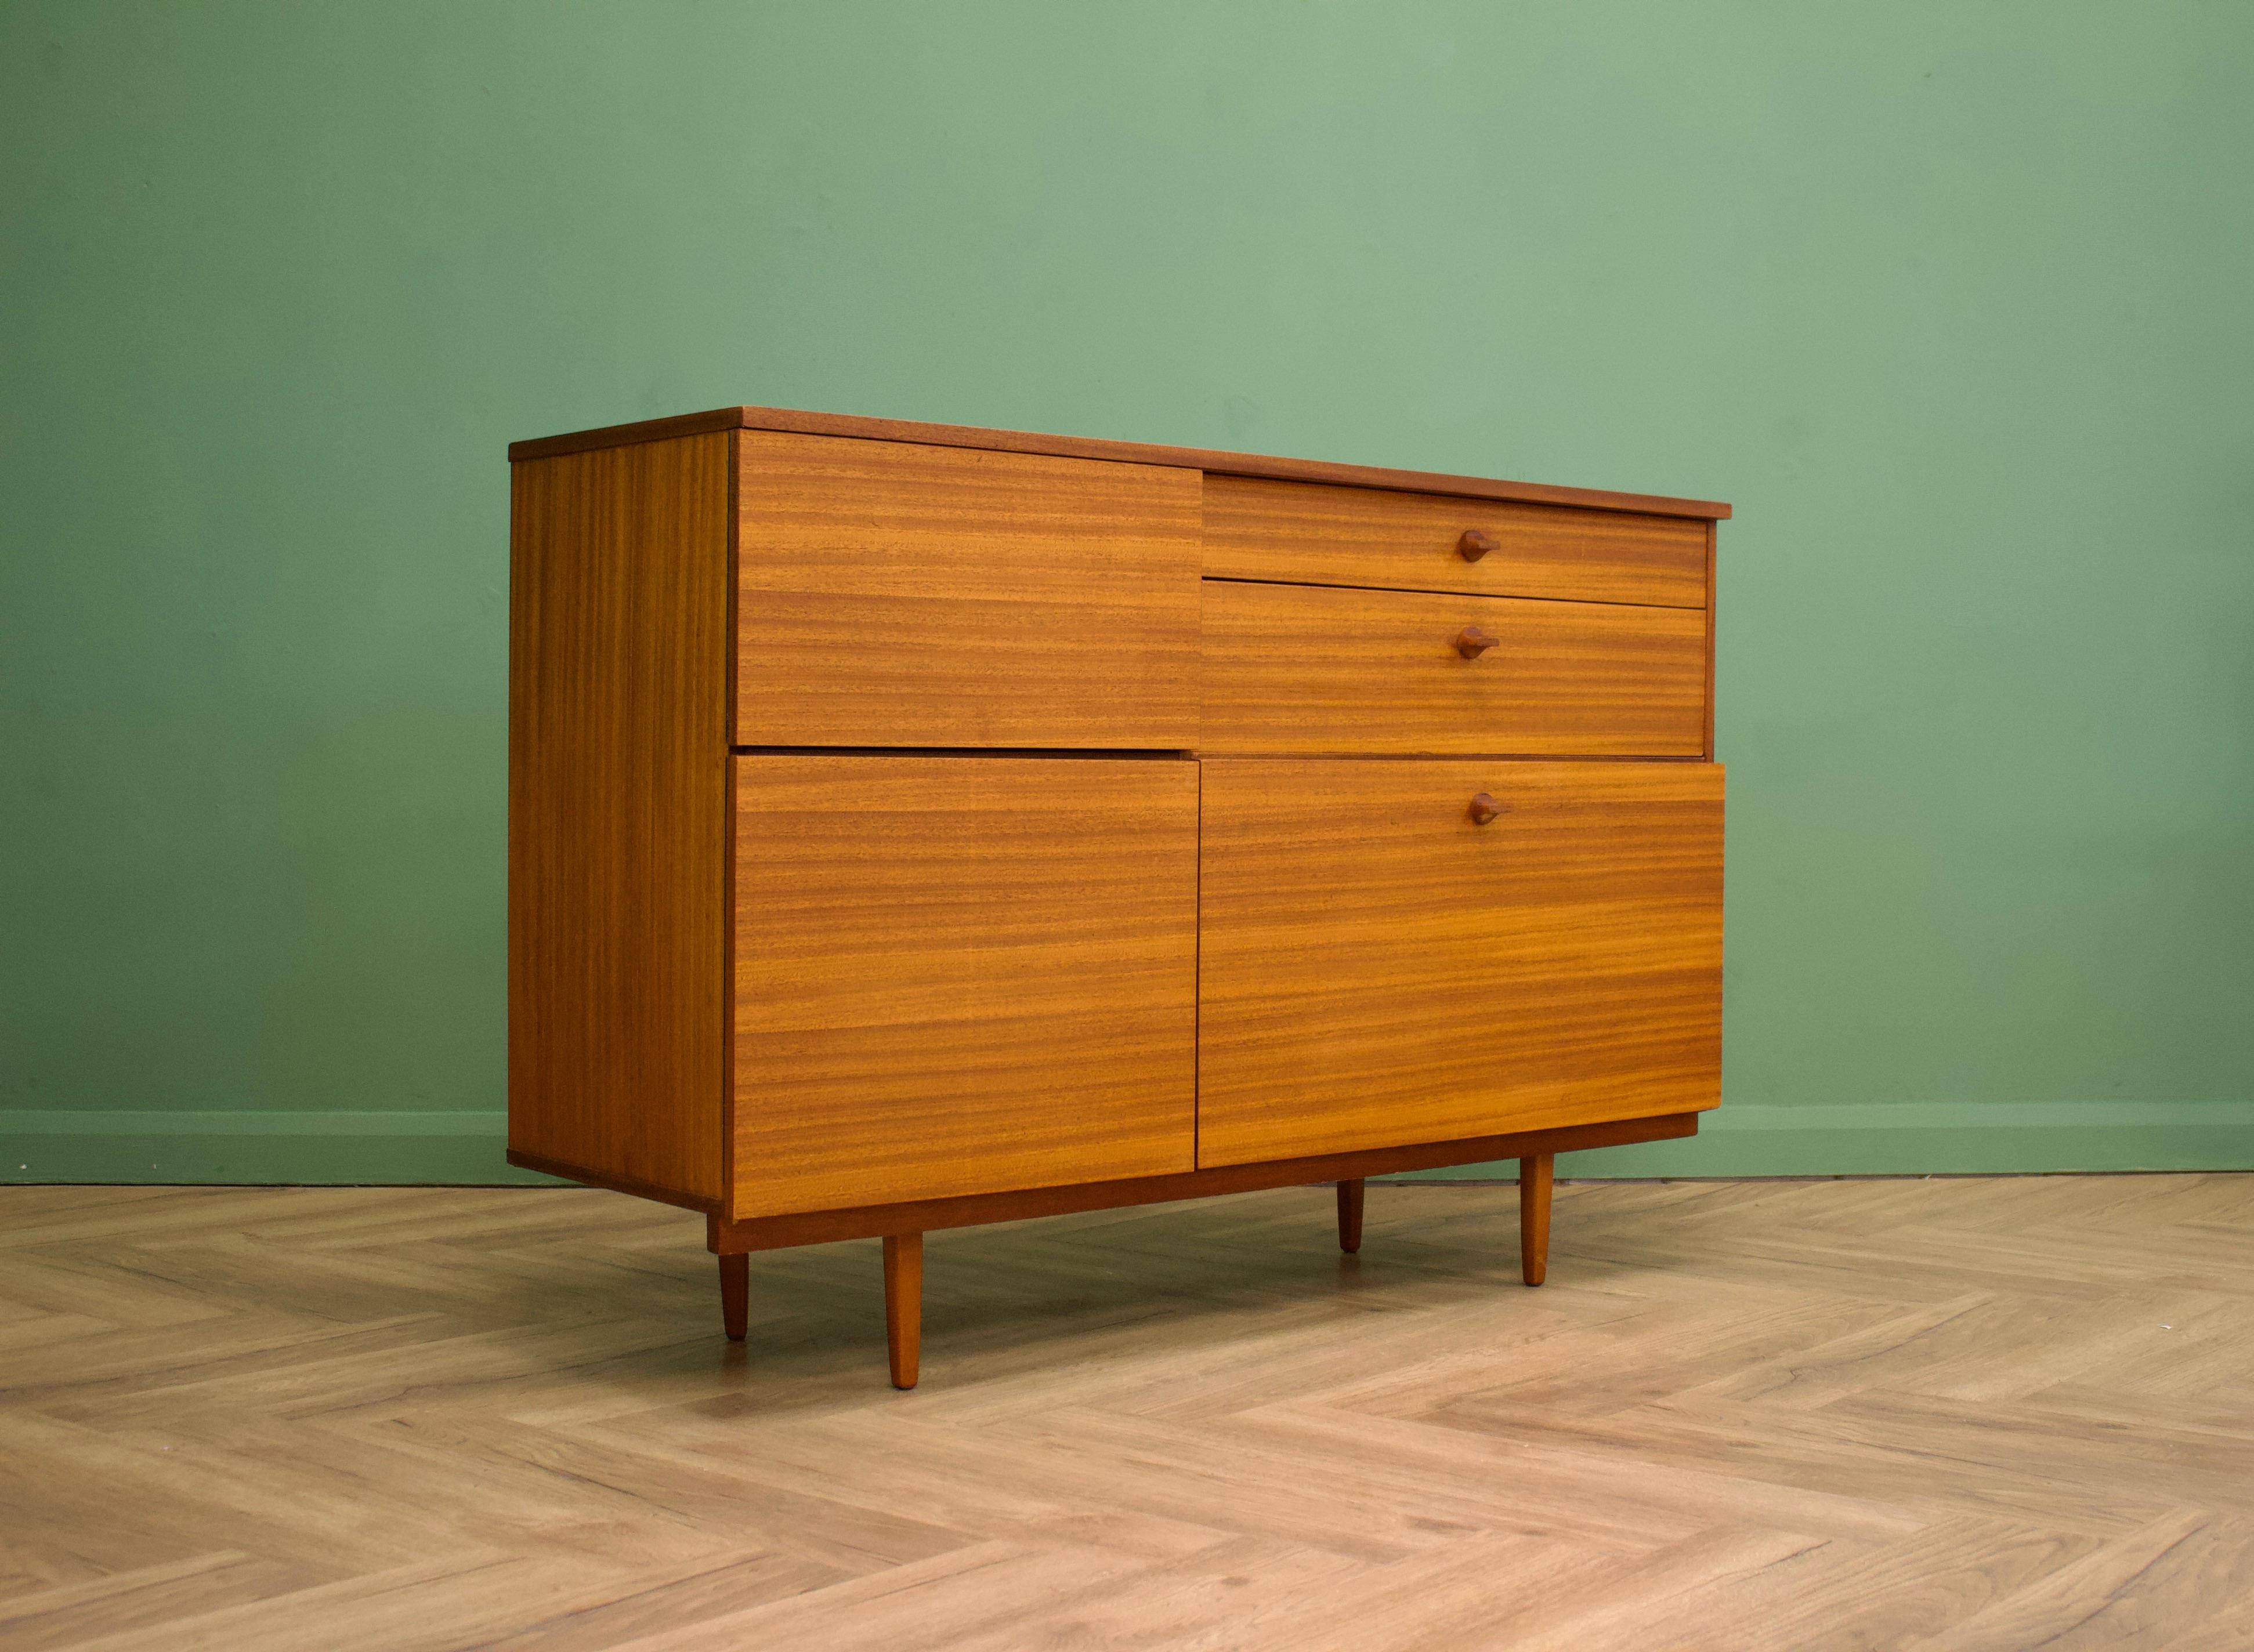 - Mid century drinks cabinet / dry bar / sideboard.
- Manufactured in the UK by Avalon
- Made from teak and teak veneer.